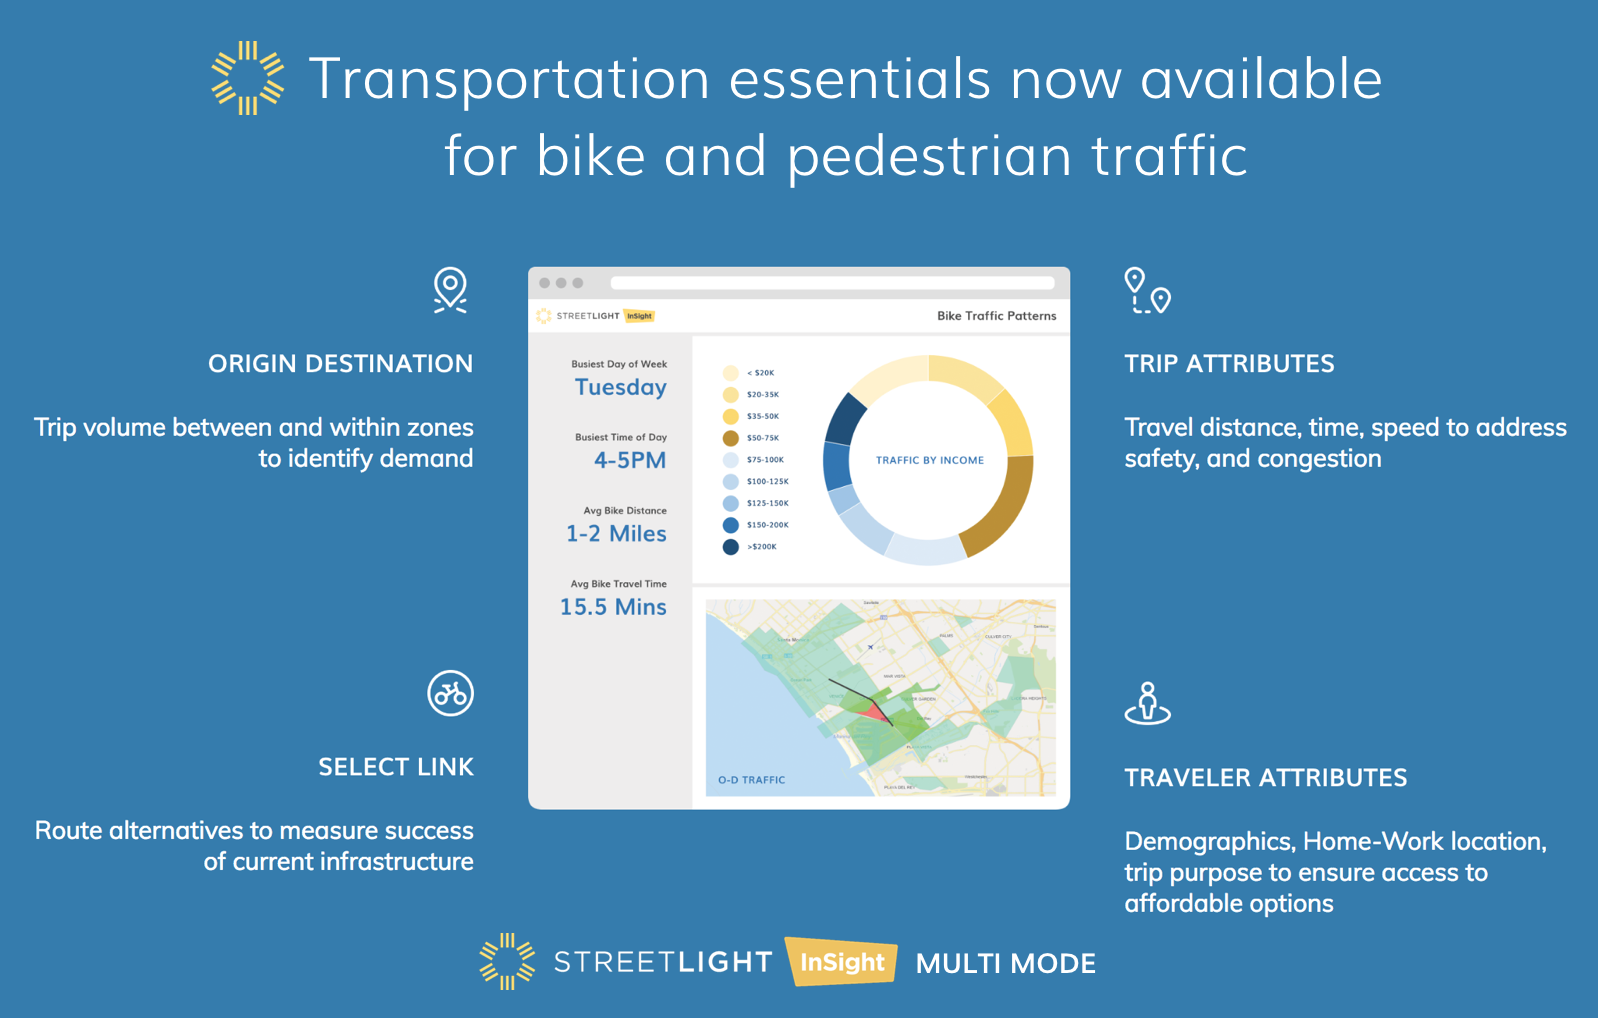 Transportation essentials now available for bike and pedestrian traffic